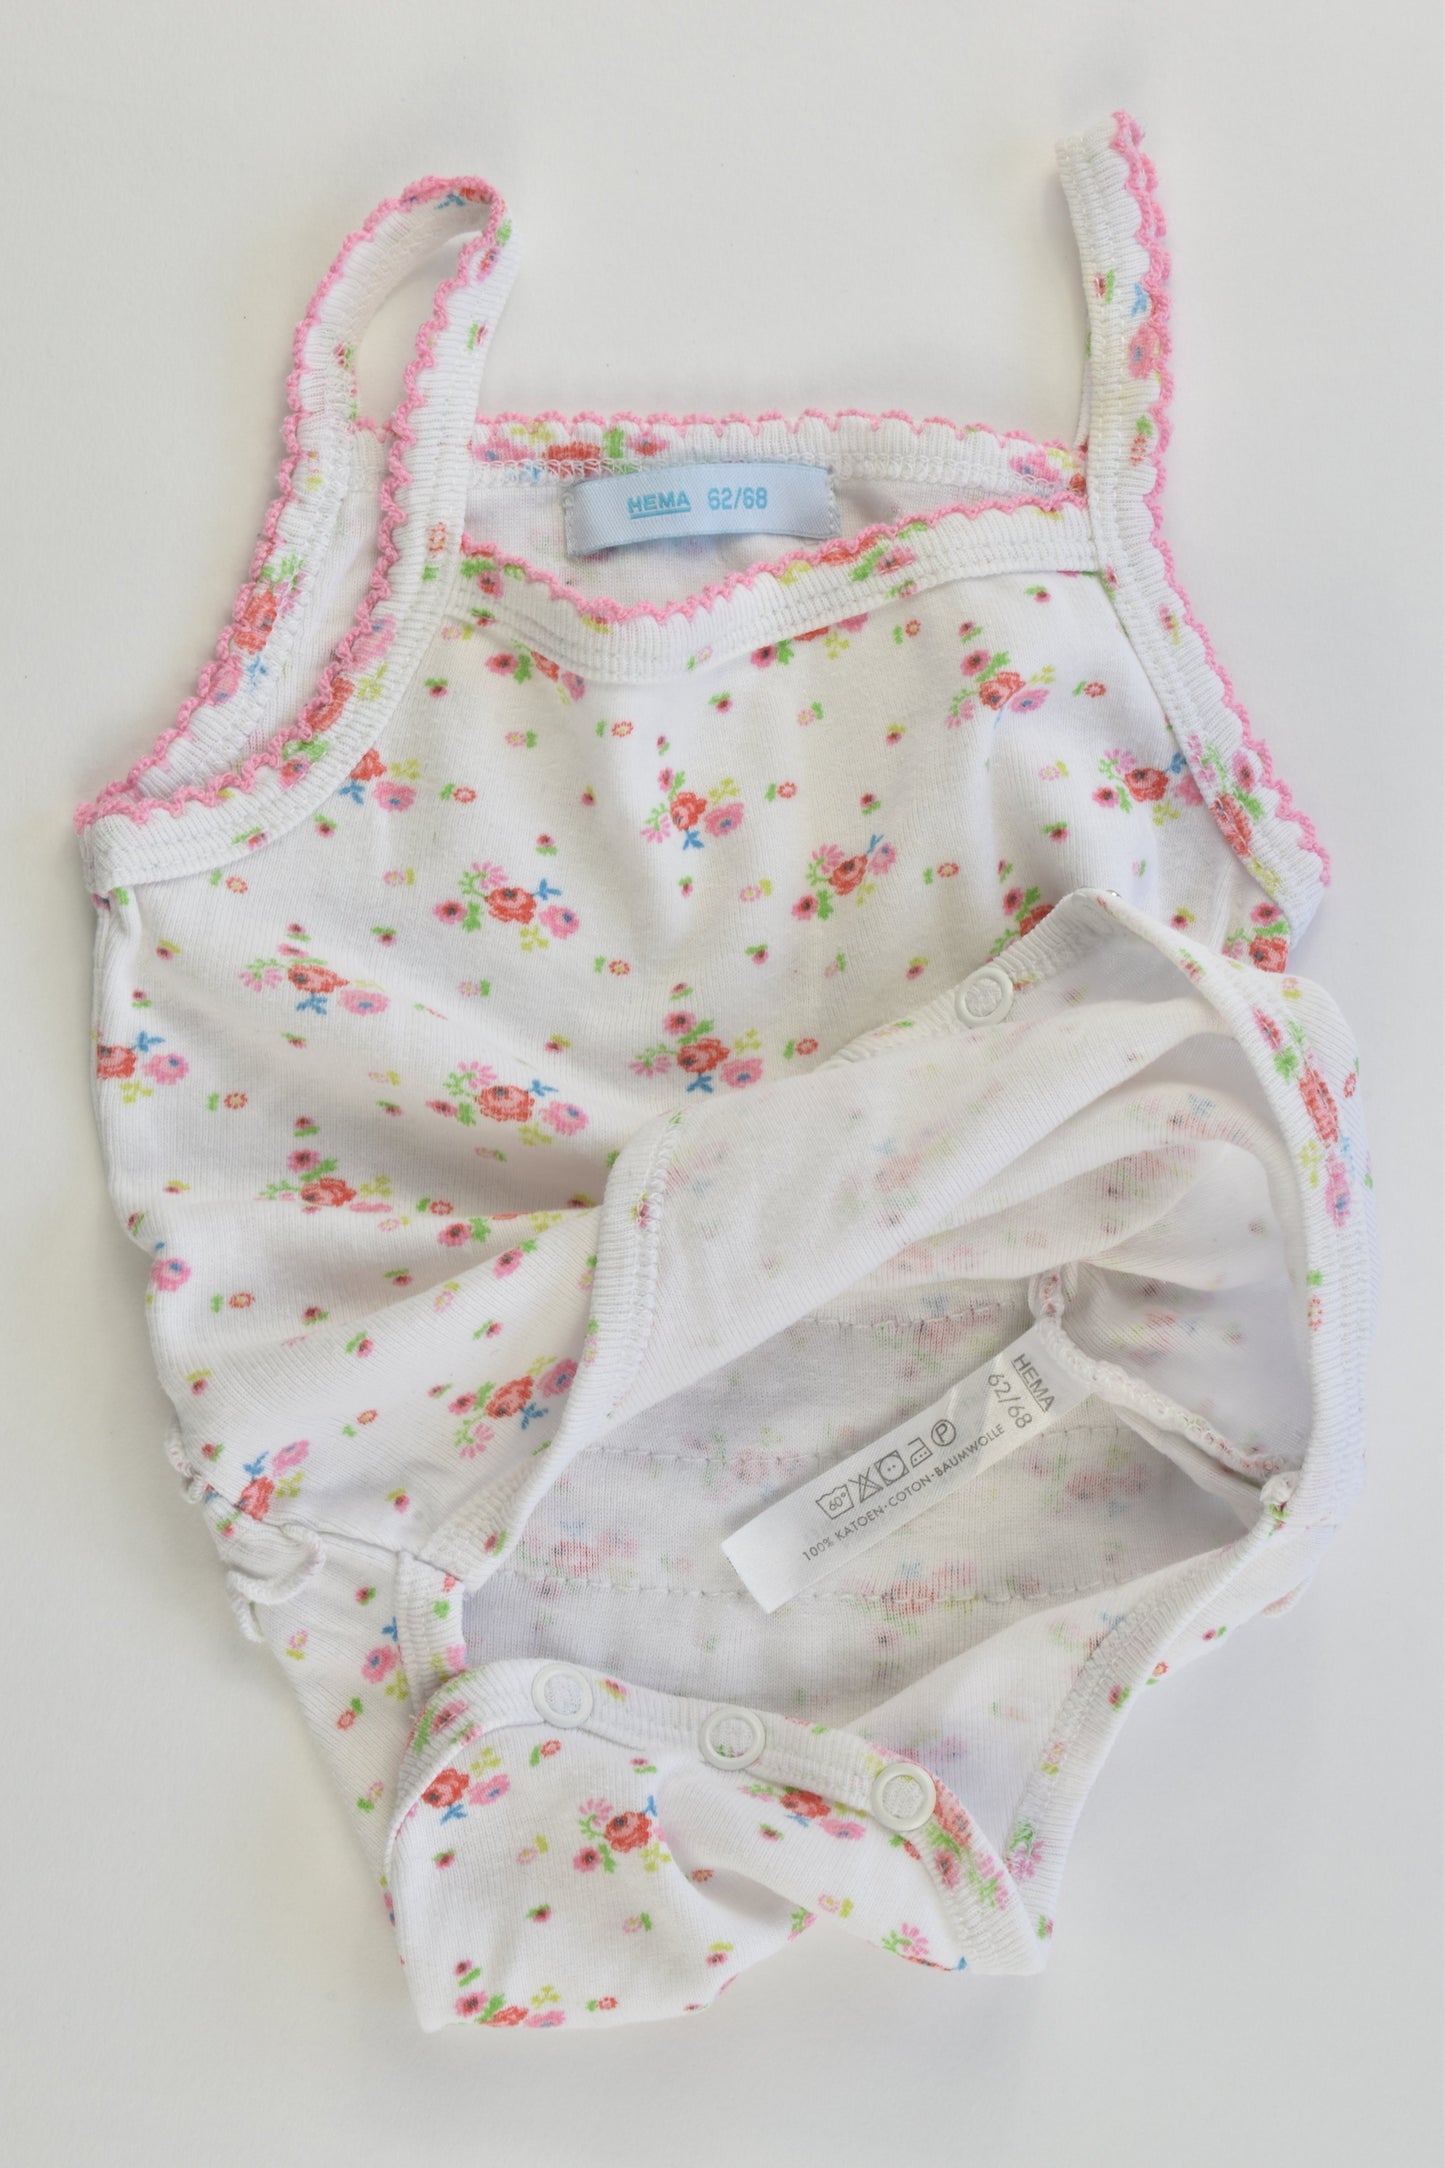 Hema Size 000 (62/68 cm) Floral Bodysuit with ruffle at the back